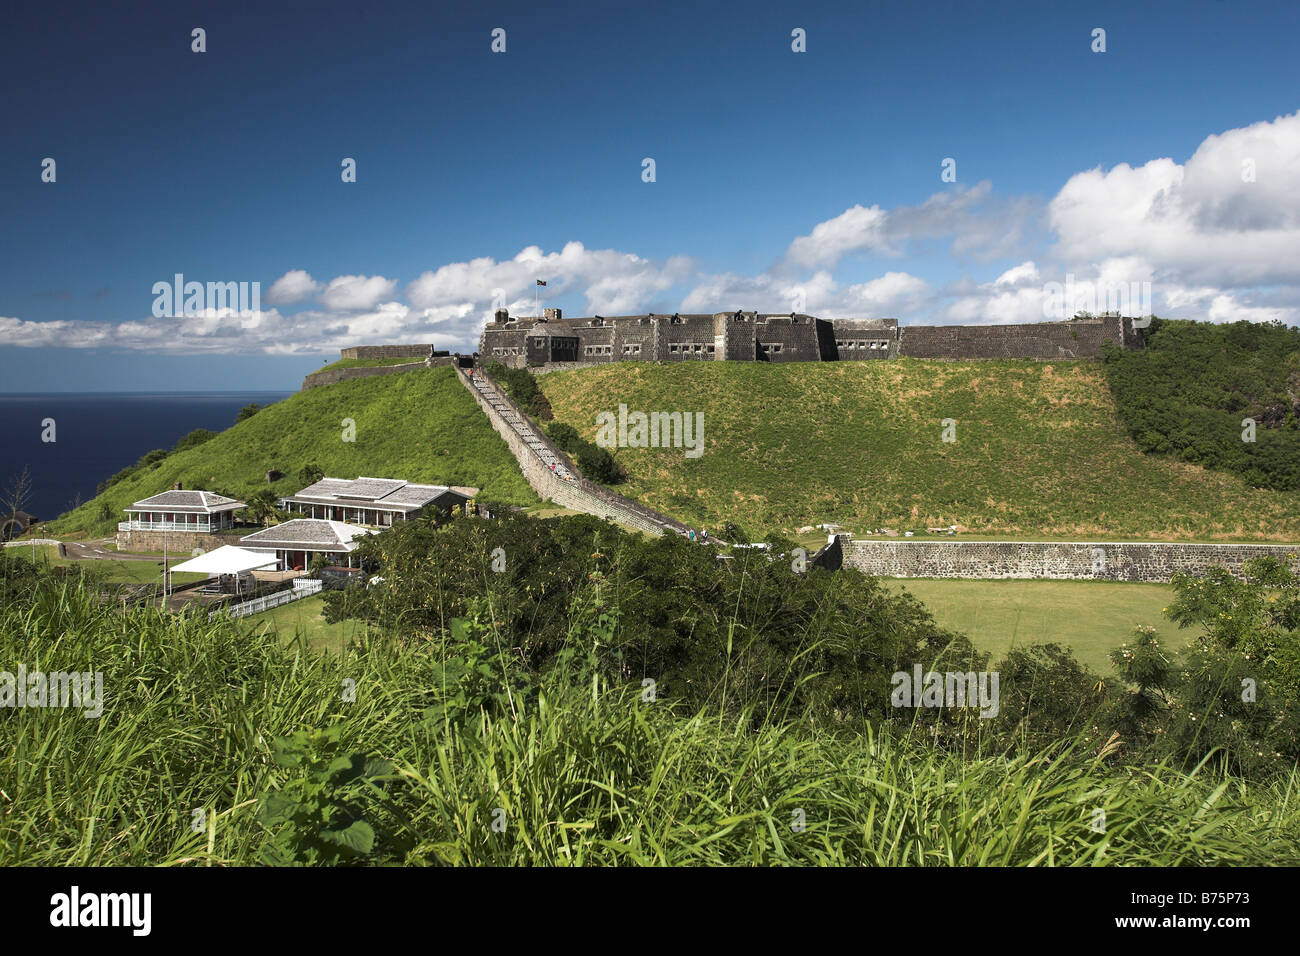 View of Brimstone Hill Fortress National Park in St Saint Kitts in the Caribbean, West Indies. Stock Photo